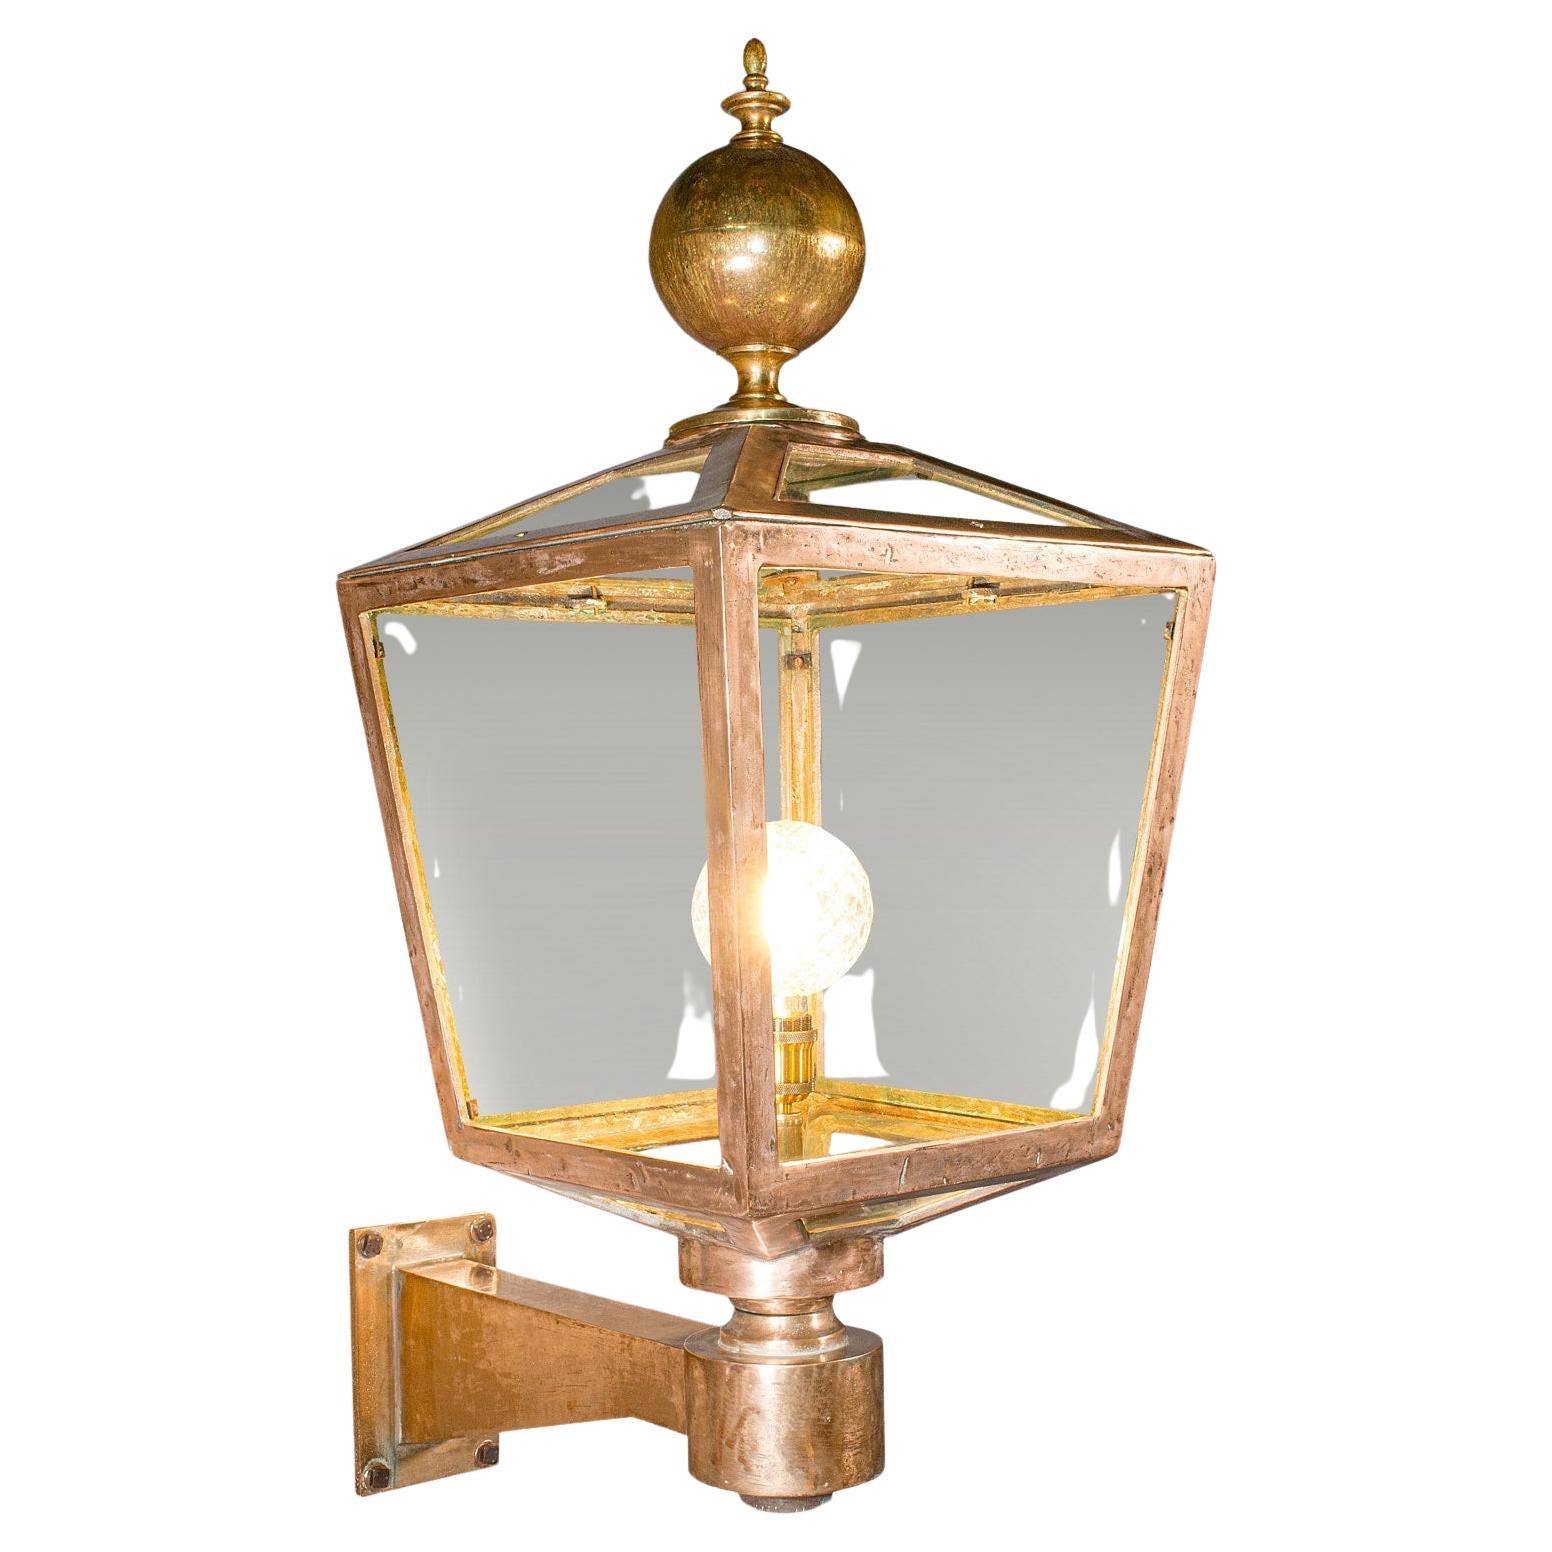 Large Antique Courtyard Light, English, Bronze, Outdoor Lamp, Victorian, C.1870 For Sale